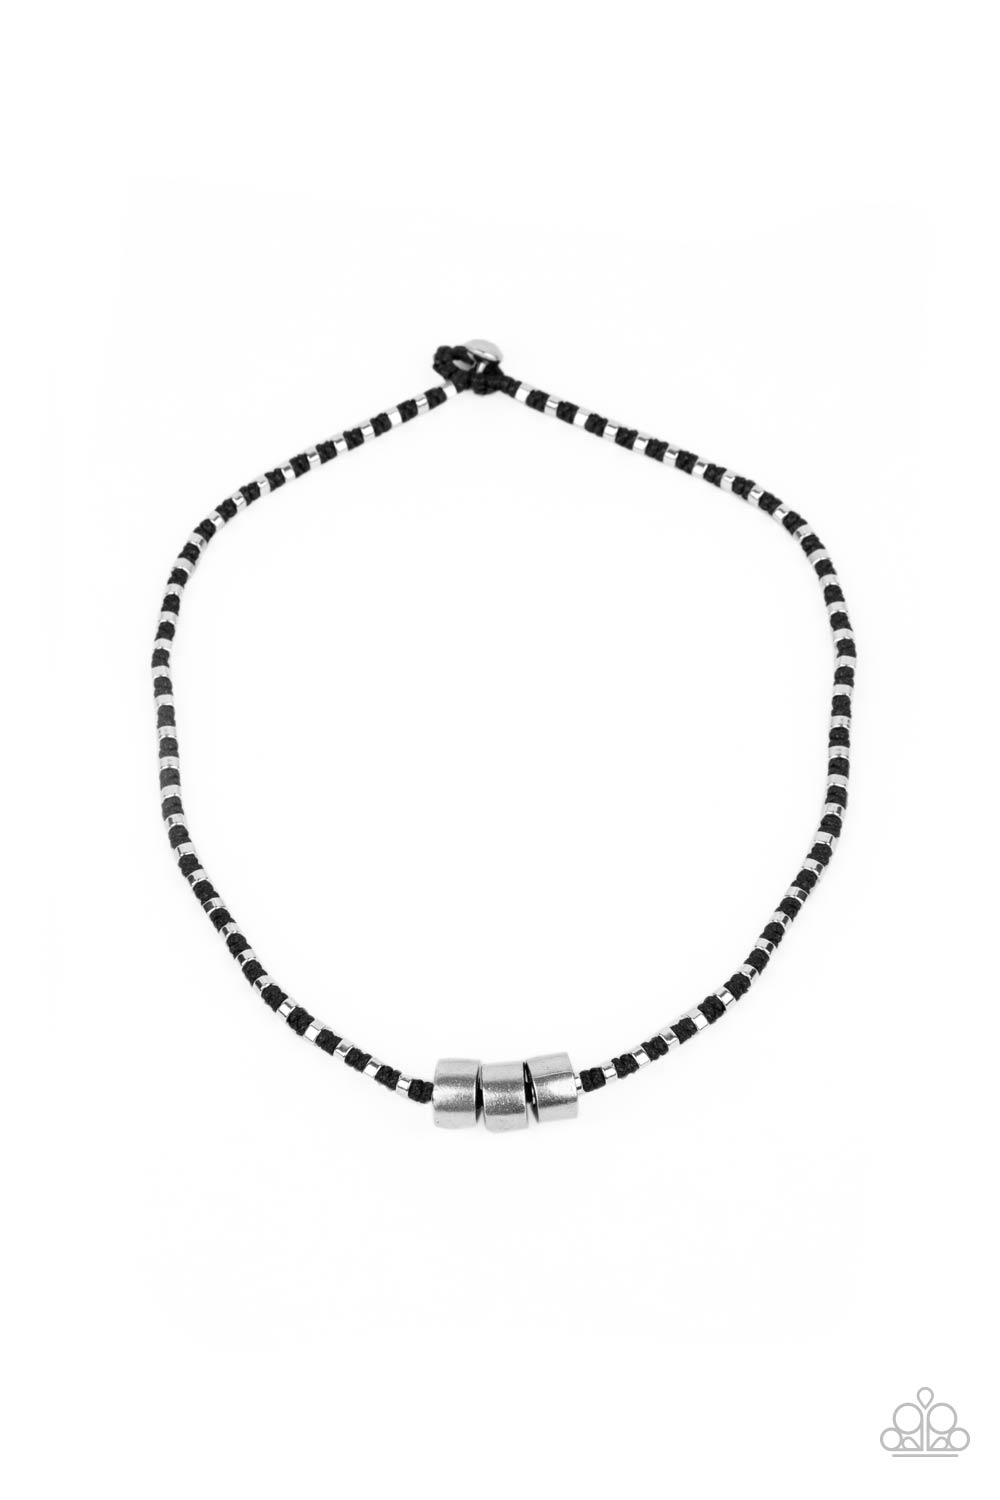 Pull The Ripcord - Black Necklace